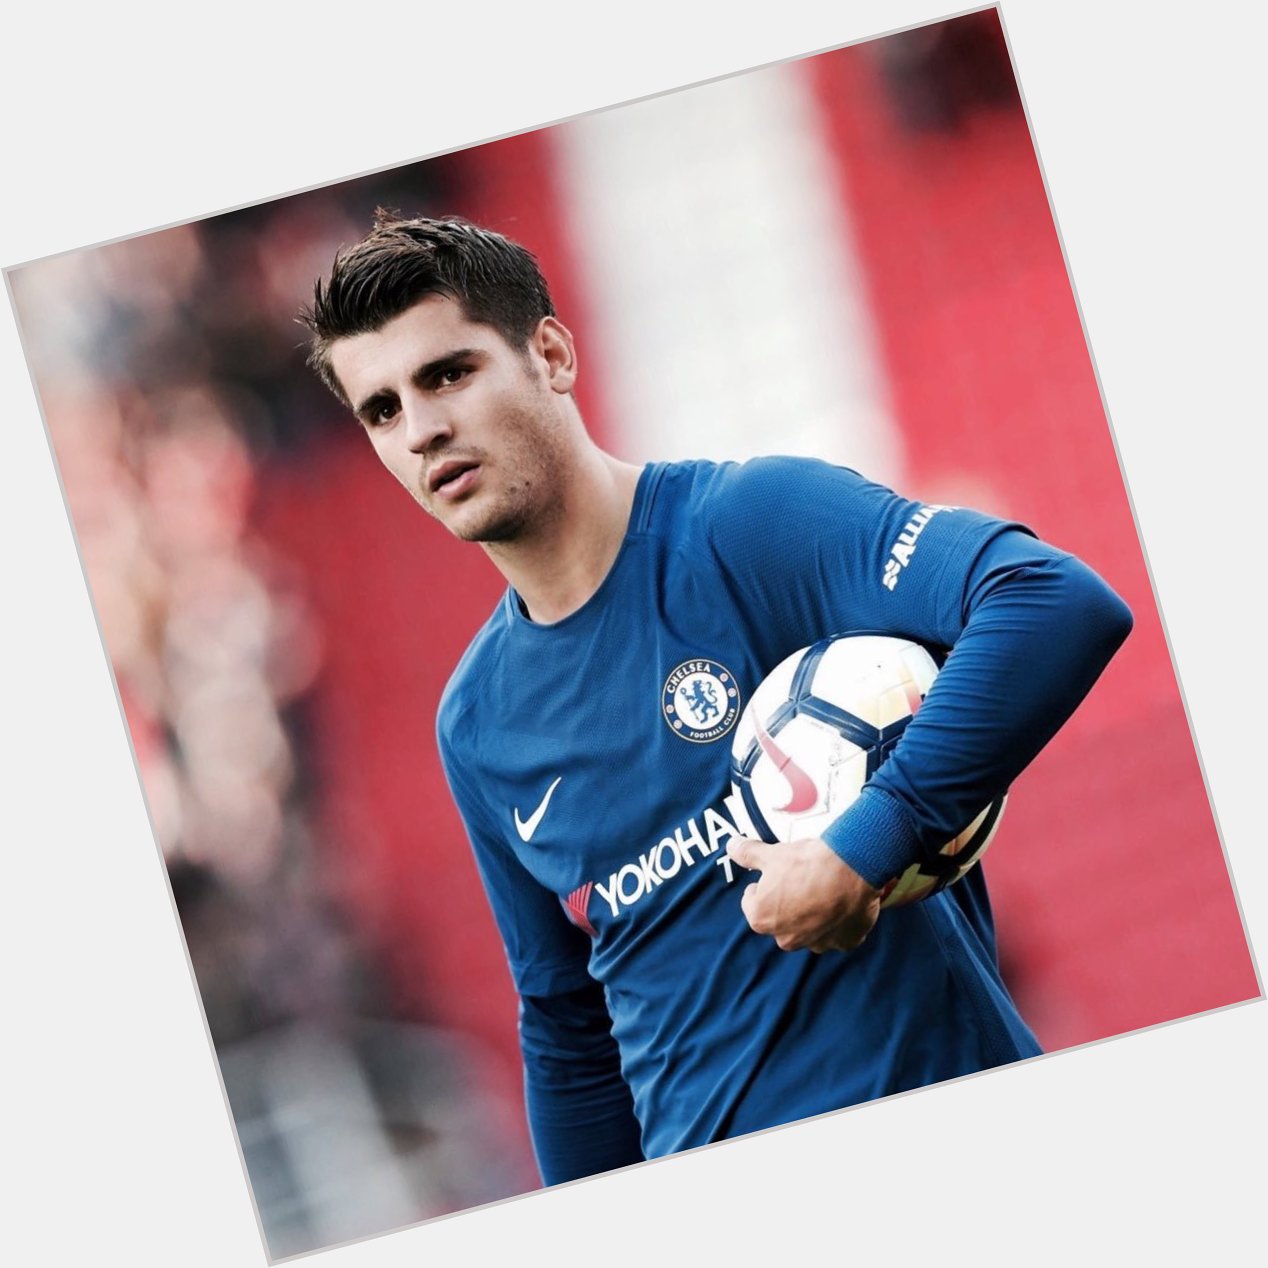 Today we say Happy 25th Birthday to Alvaro Morata!

He has had a great start in England. 